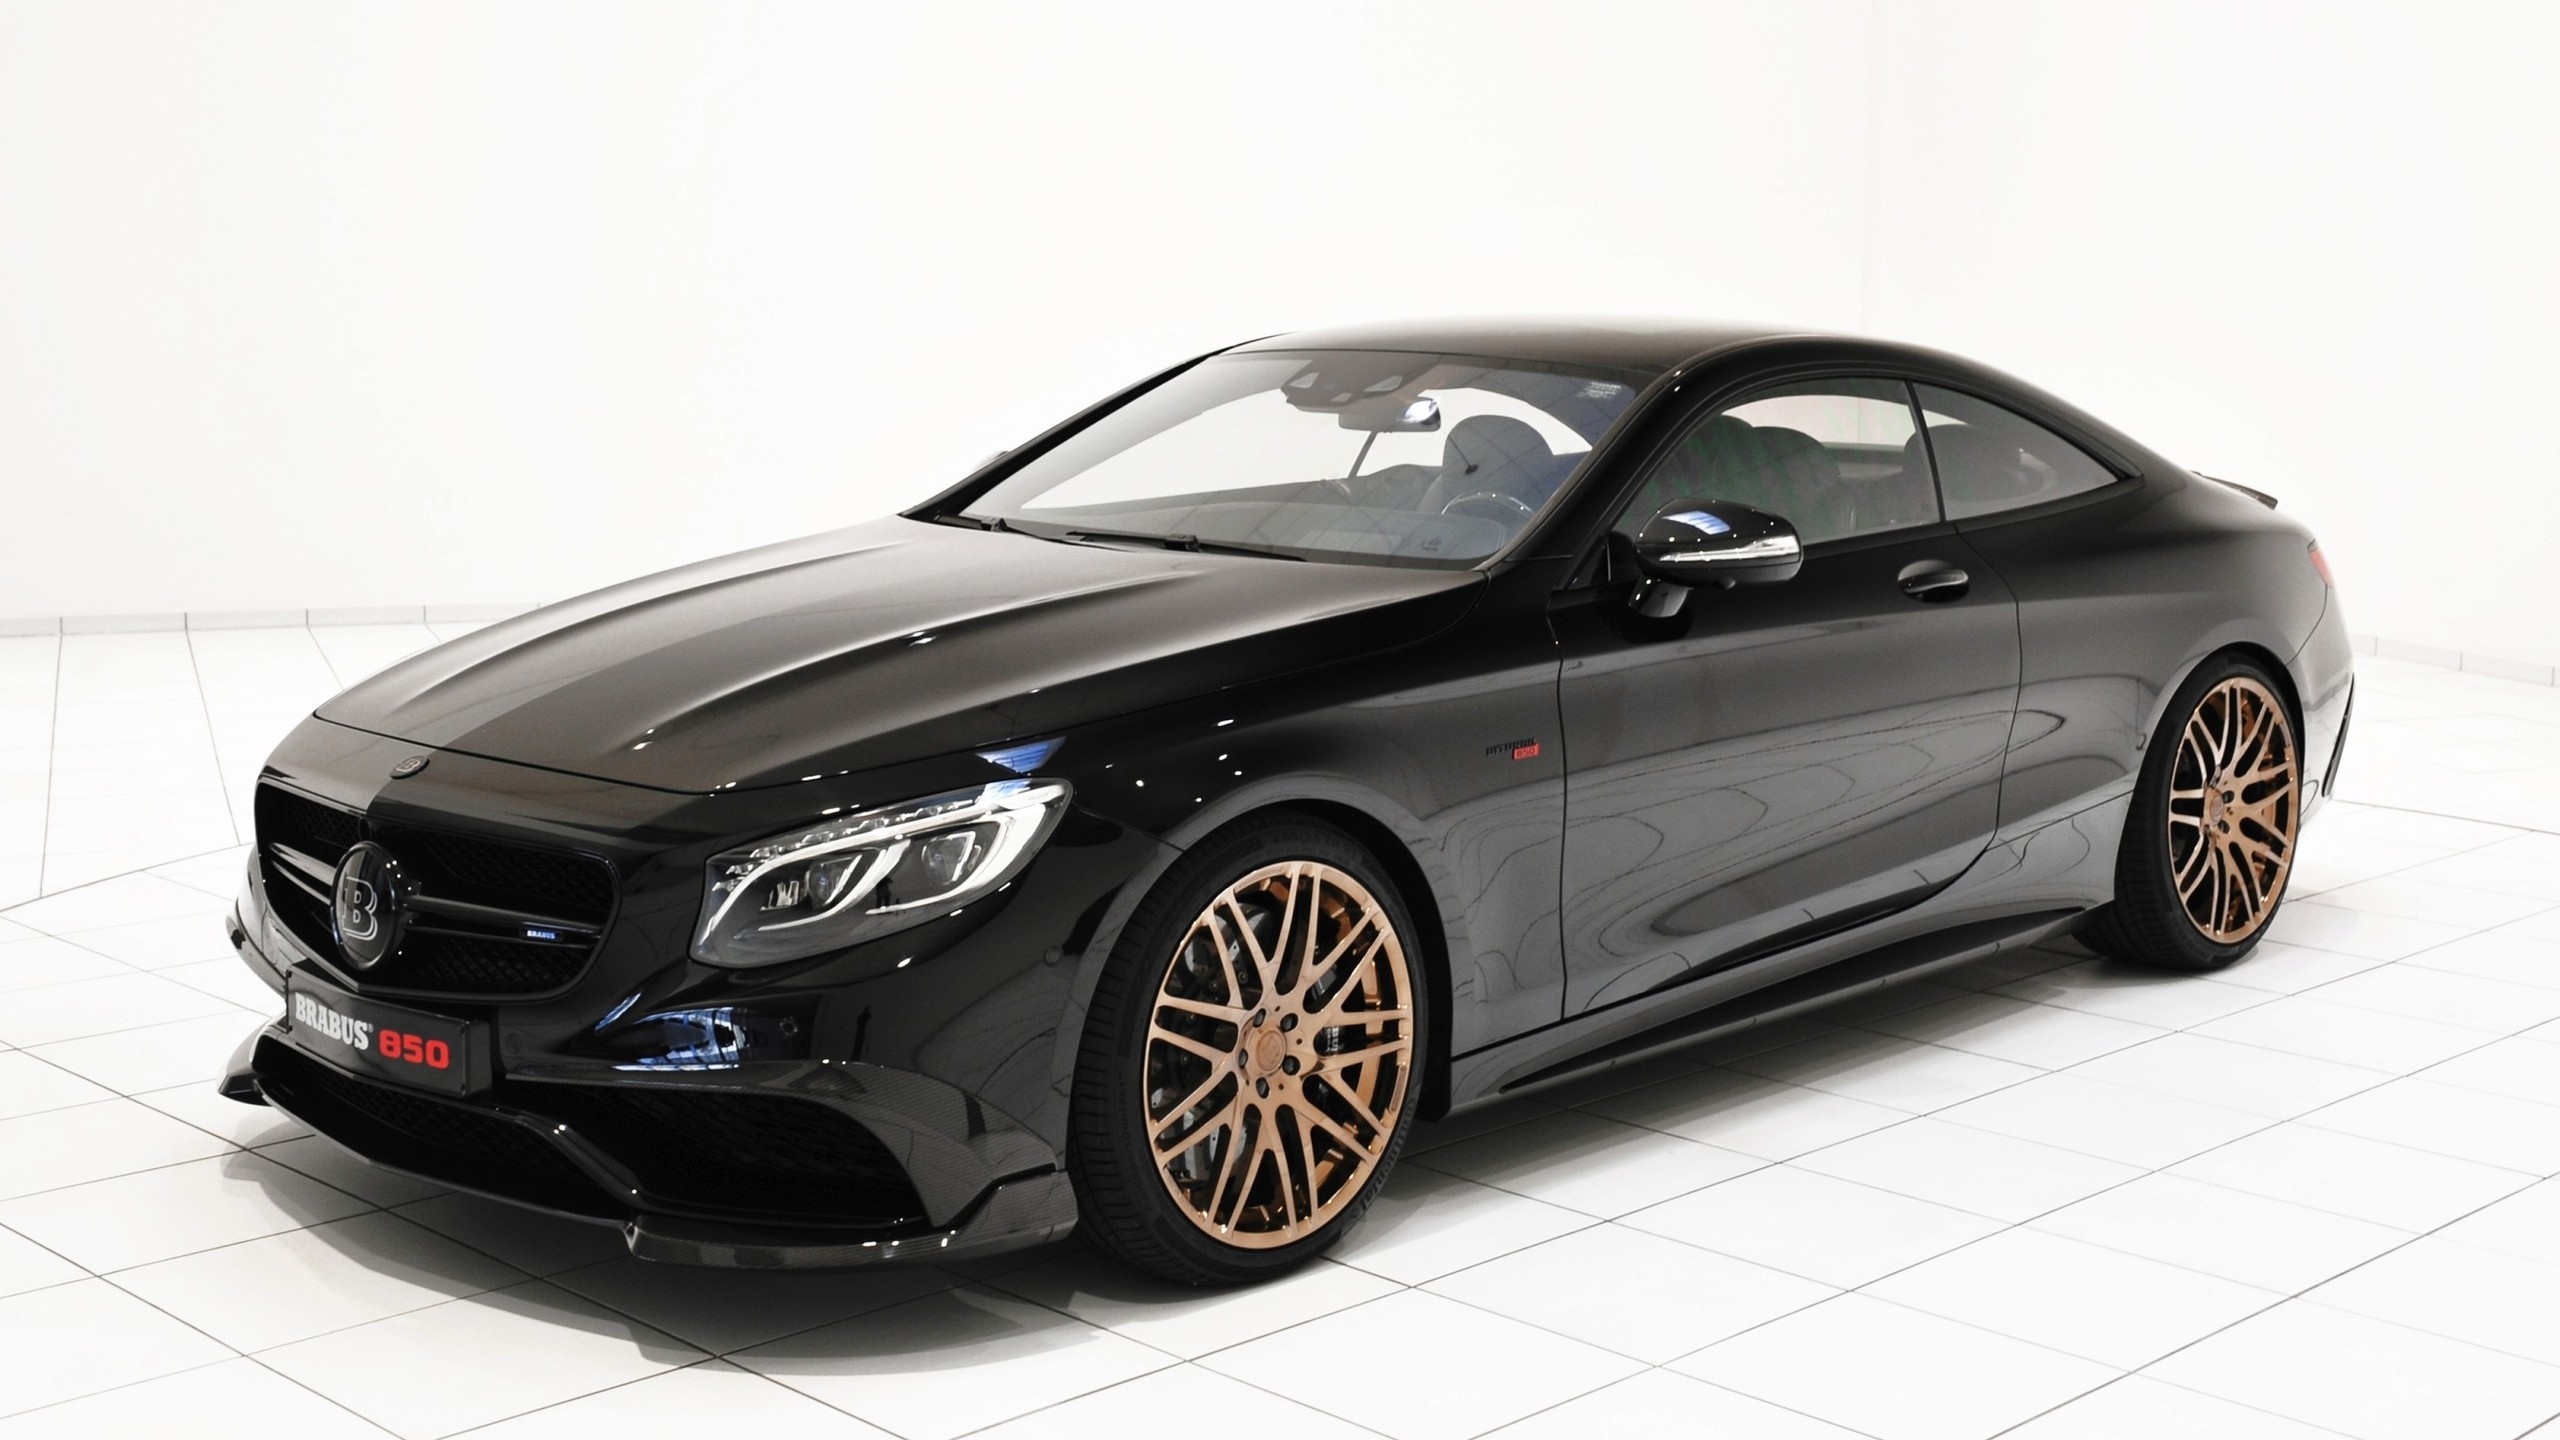 Mercedes Benz S63 AMG Brabus for 2560x1440 HDTV resolution